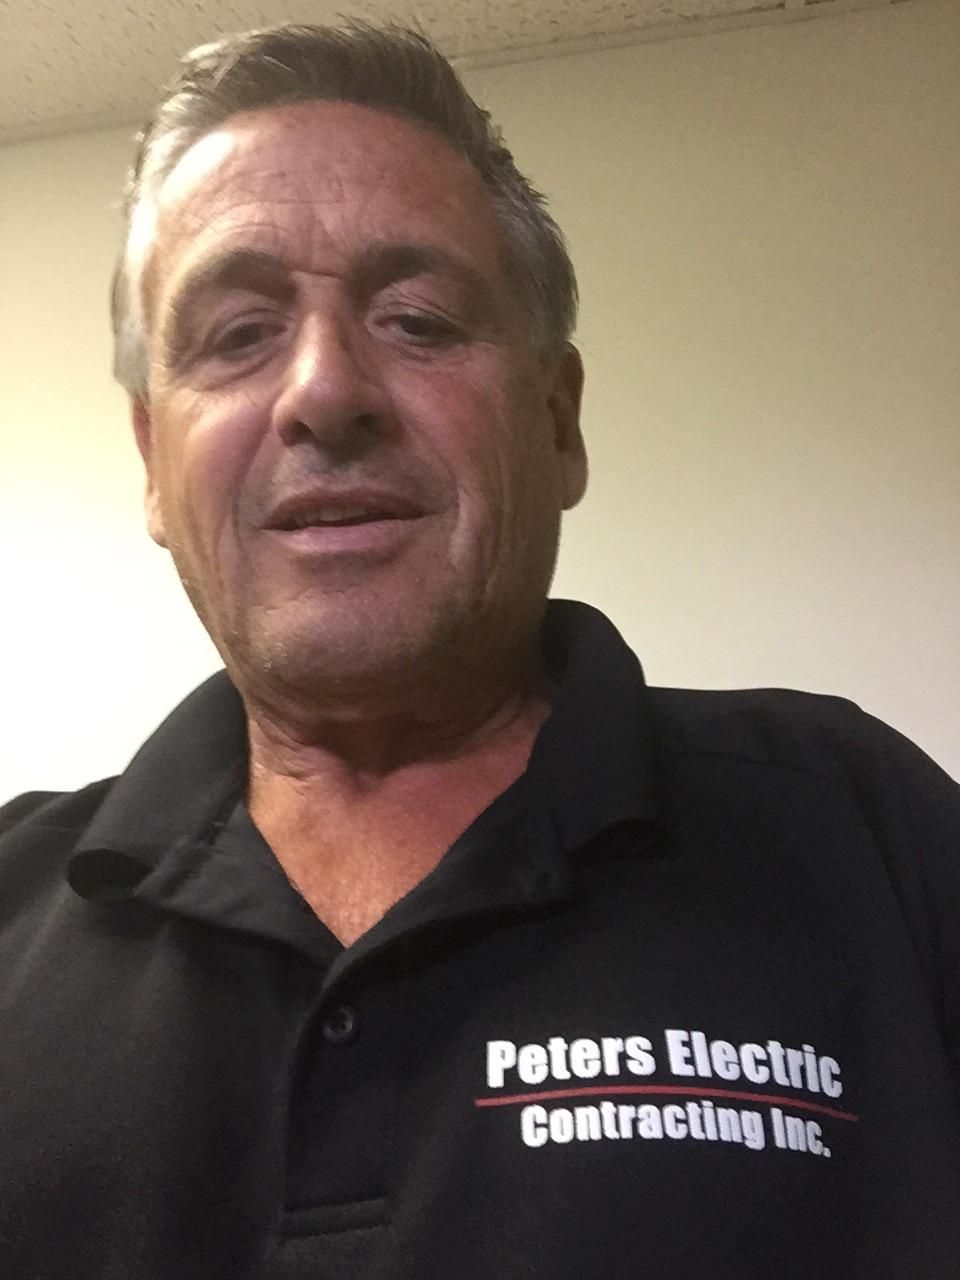 Peters electric contracting inc.